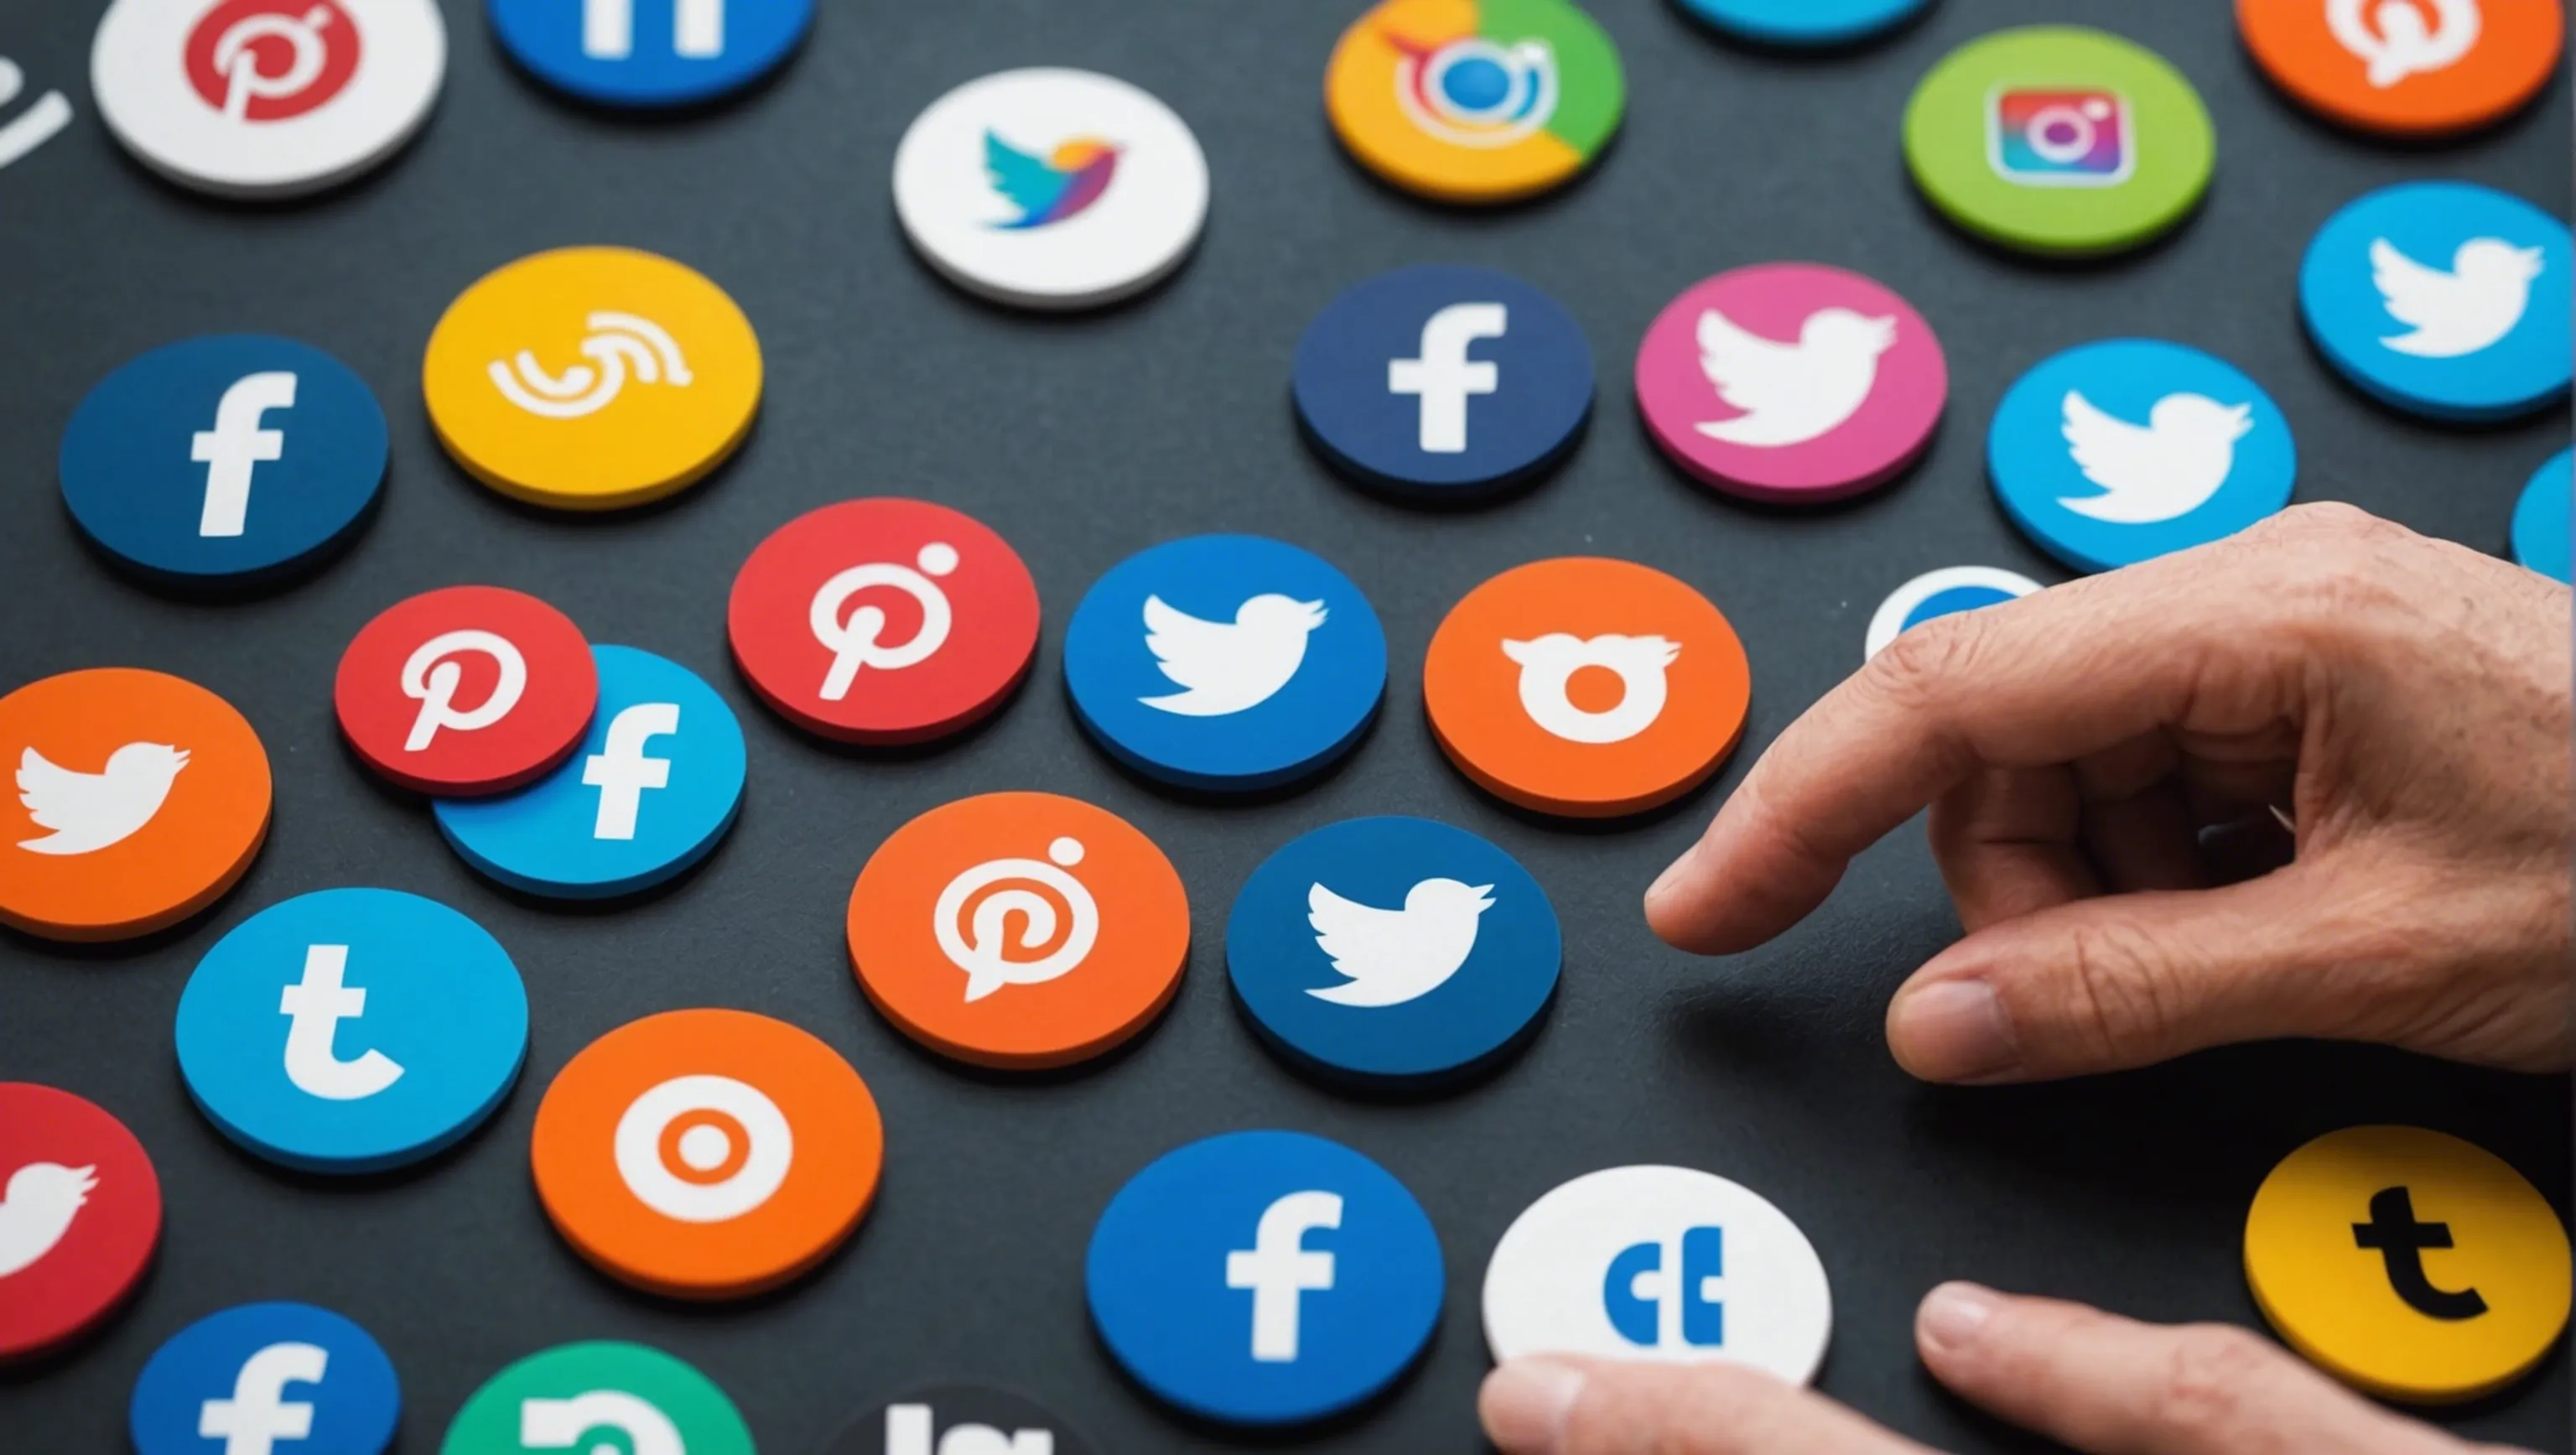 Best practices for using social media sharing buttons